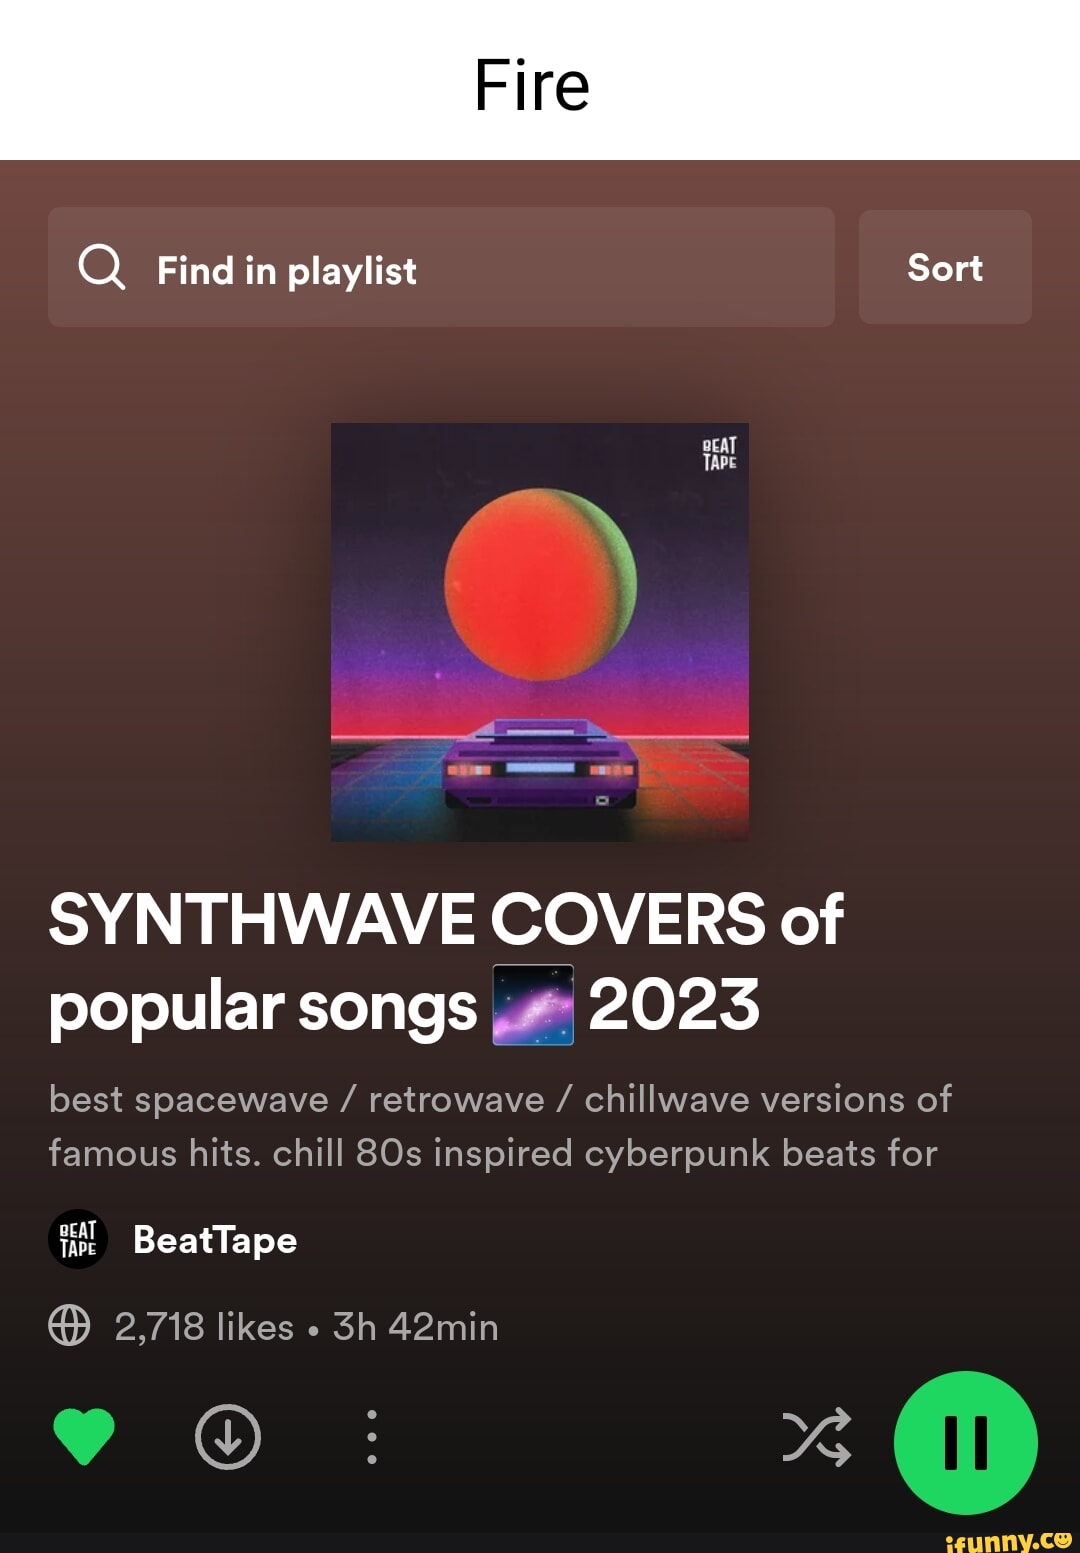 𝐒𝐩𝐚𝐜𝐞𝐰𝐚𝐯𝐞 - A Synthwave/Retrowave